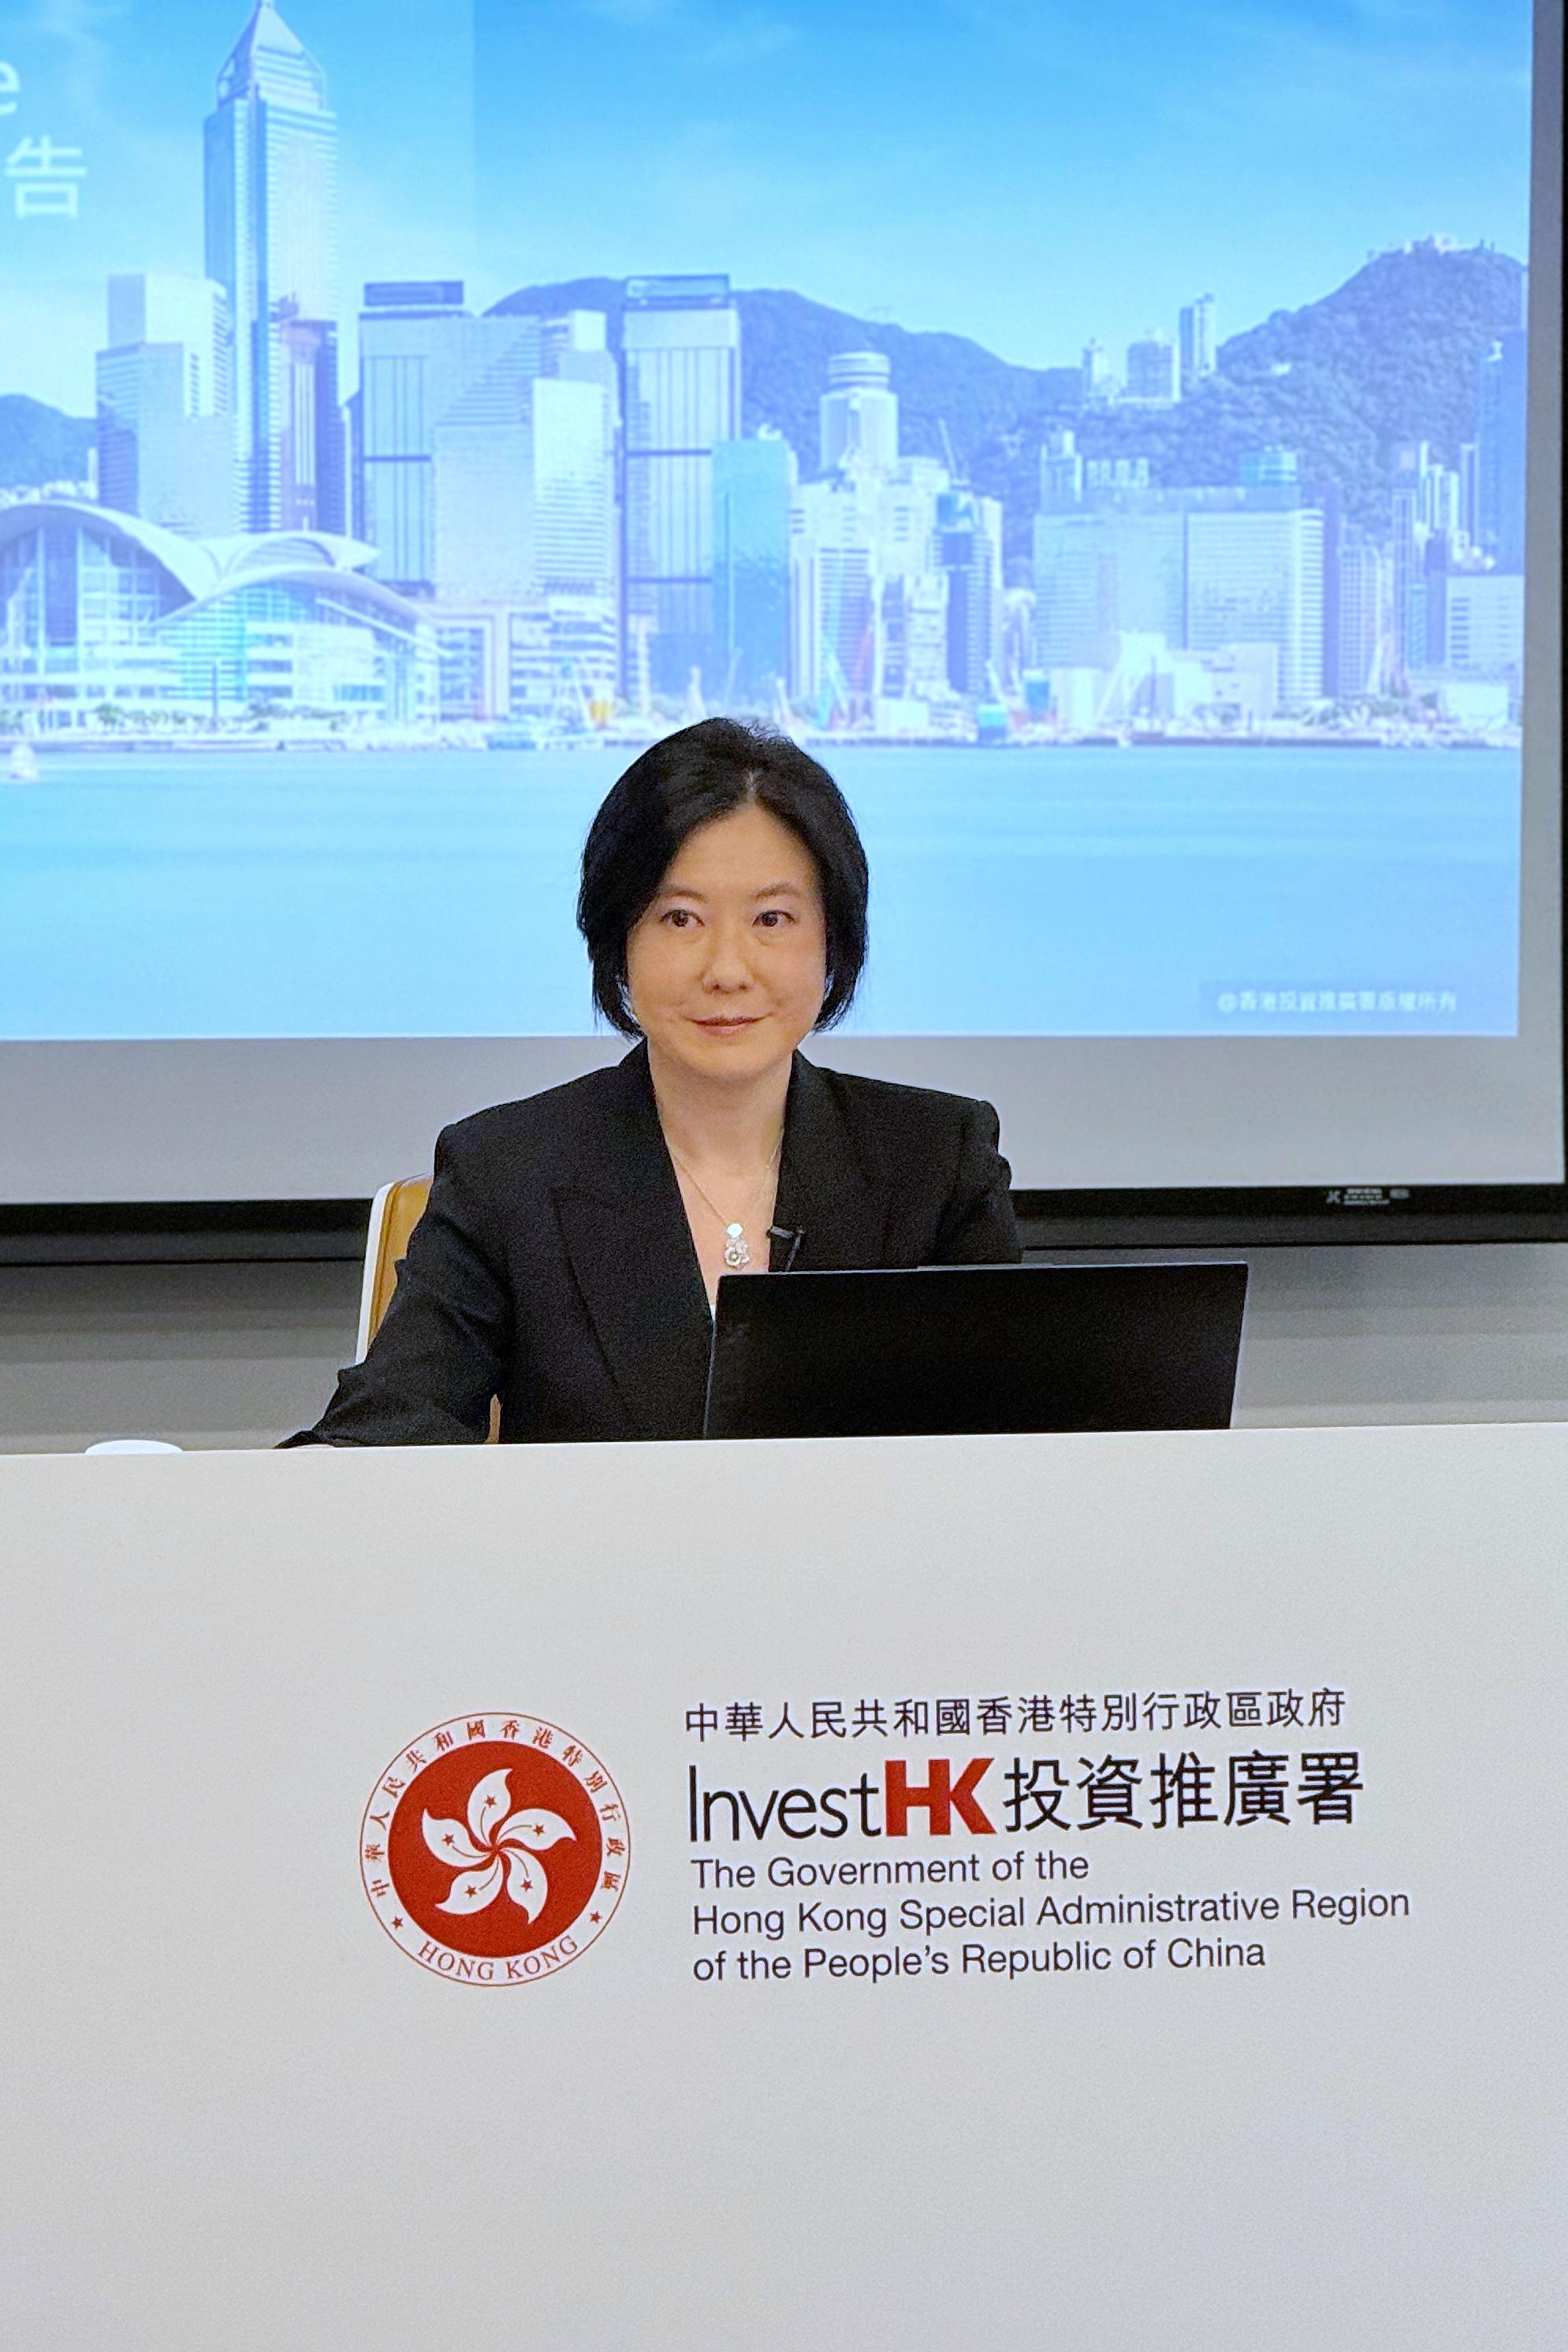 Invest Hong Kong today (July 2) announced that the department had assisted 322 Mainland and overseas companies to set up or expand their business in Hong Kong during the first six months of the year. Photo shows the Director-General of Investment Promotion, Ms Alpha Lau, at the press conference.  